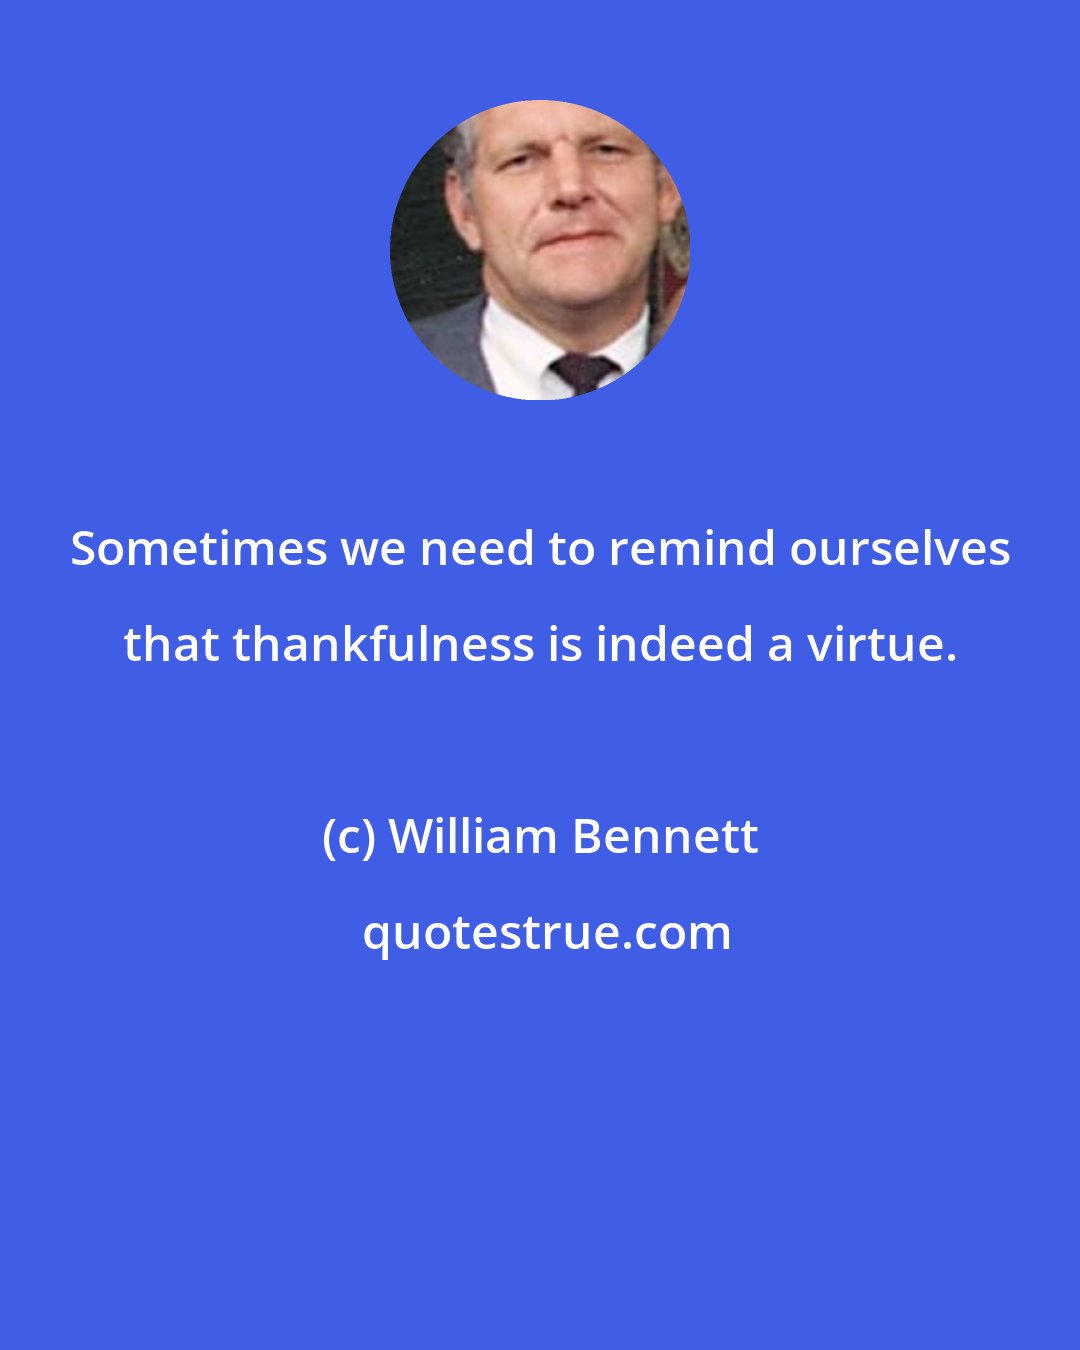 William Bennett: Sometimes we need to remind ourselves that thankfulness is indeed a virtue.